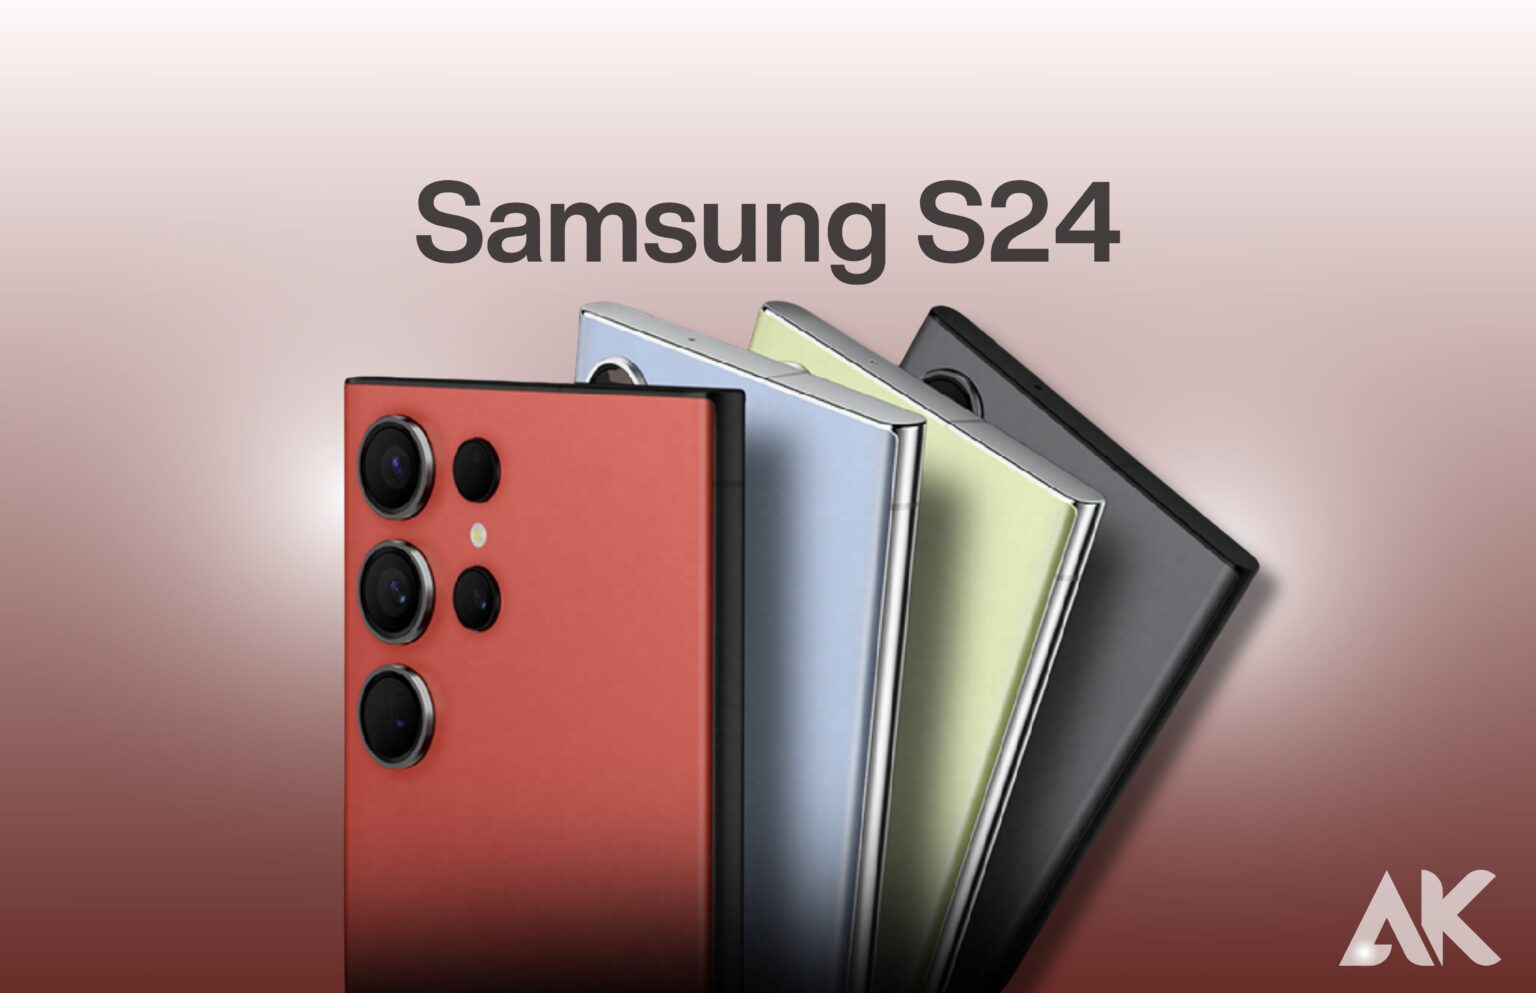 Samsung S24: Everything You Need to Know About the Upcoming Flagship